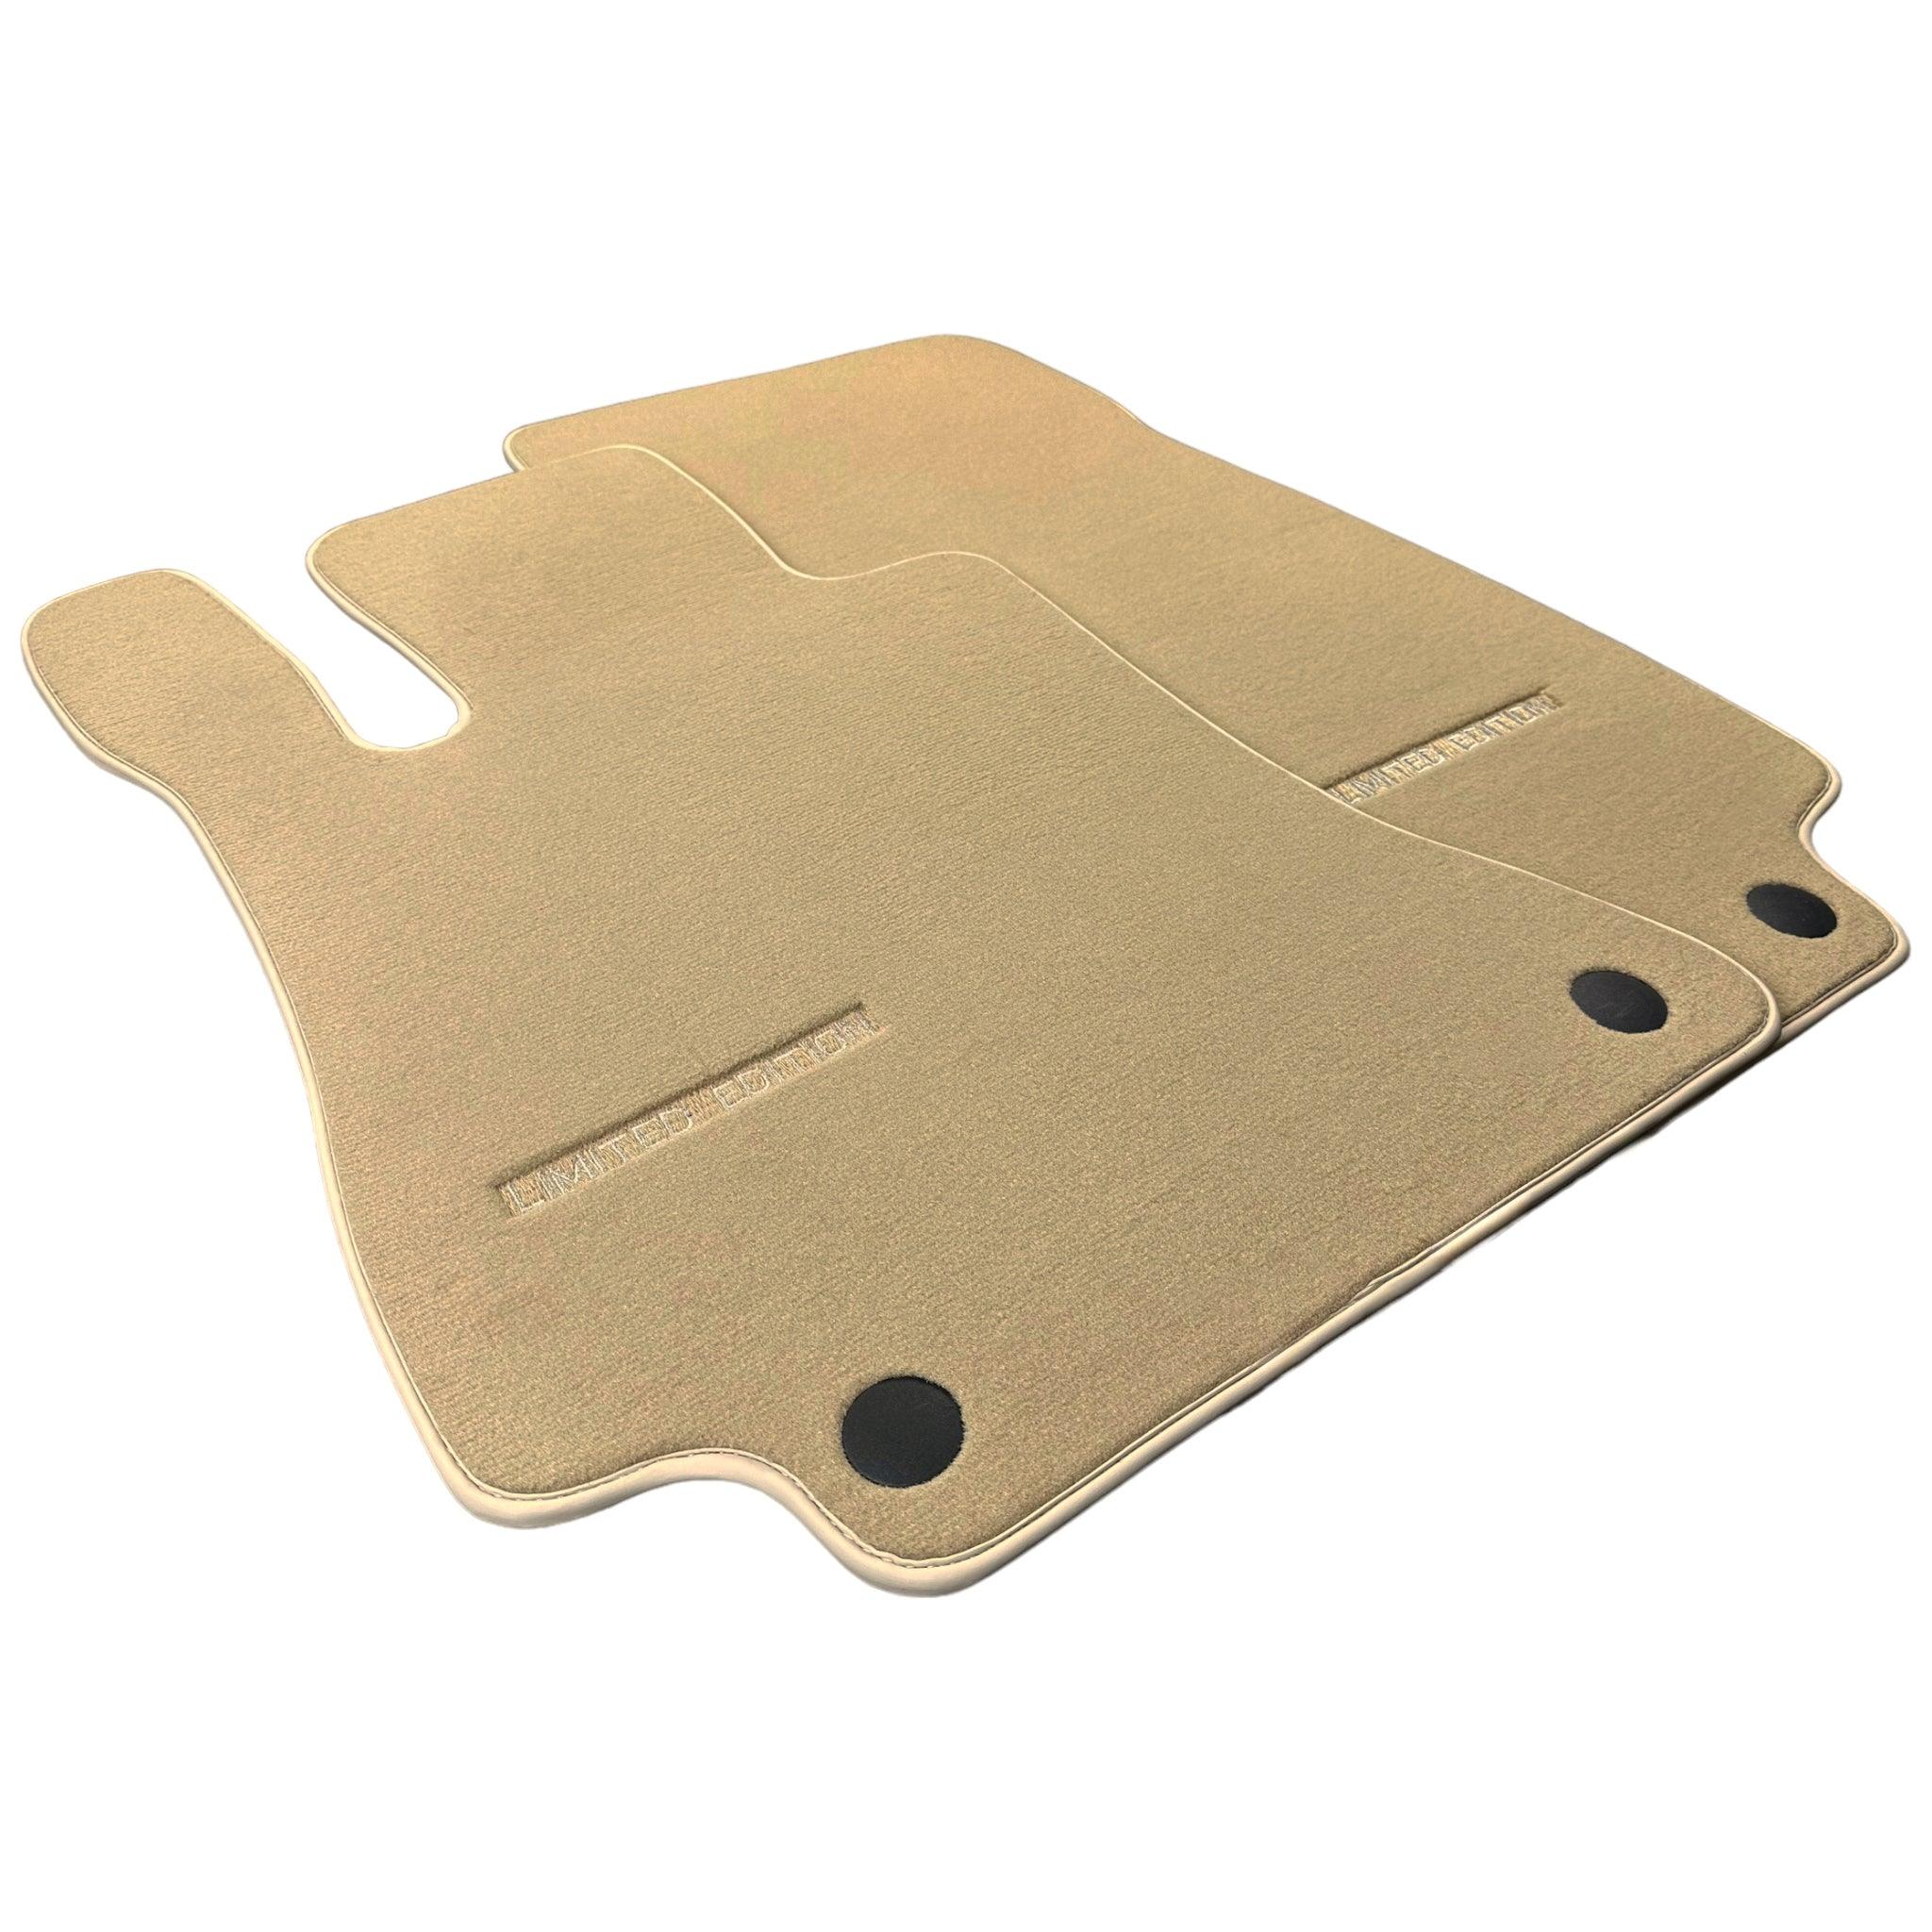 Beige Floor Mats For Mercedes Benz S-Class X222 Maybach (2015-2021) | Limited Edition